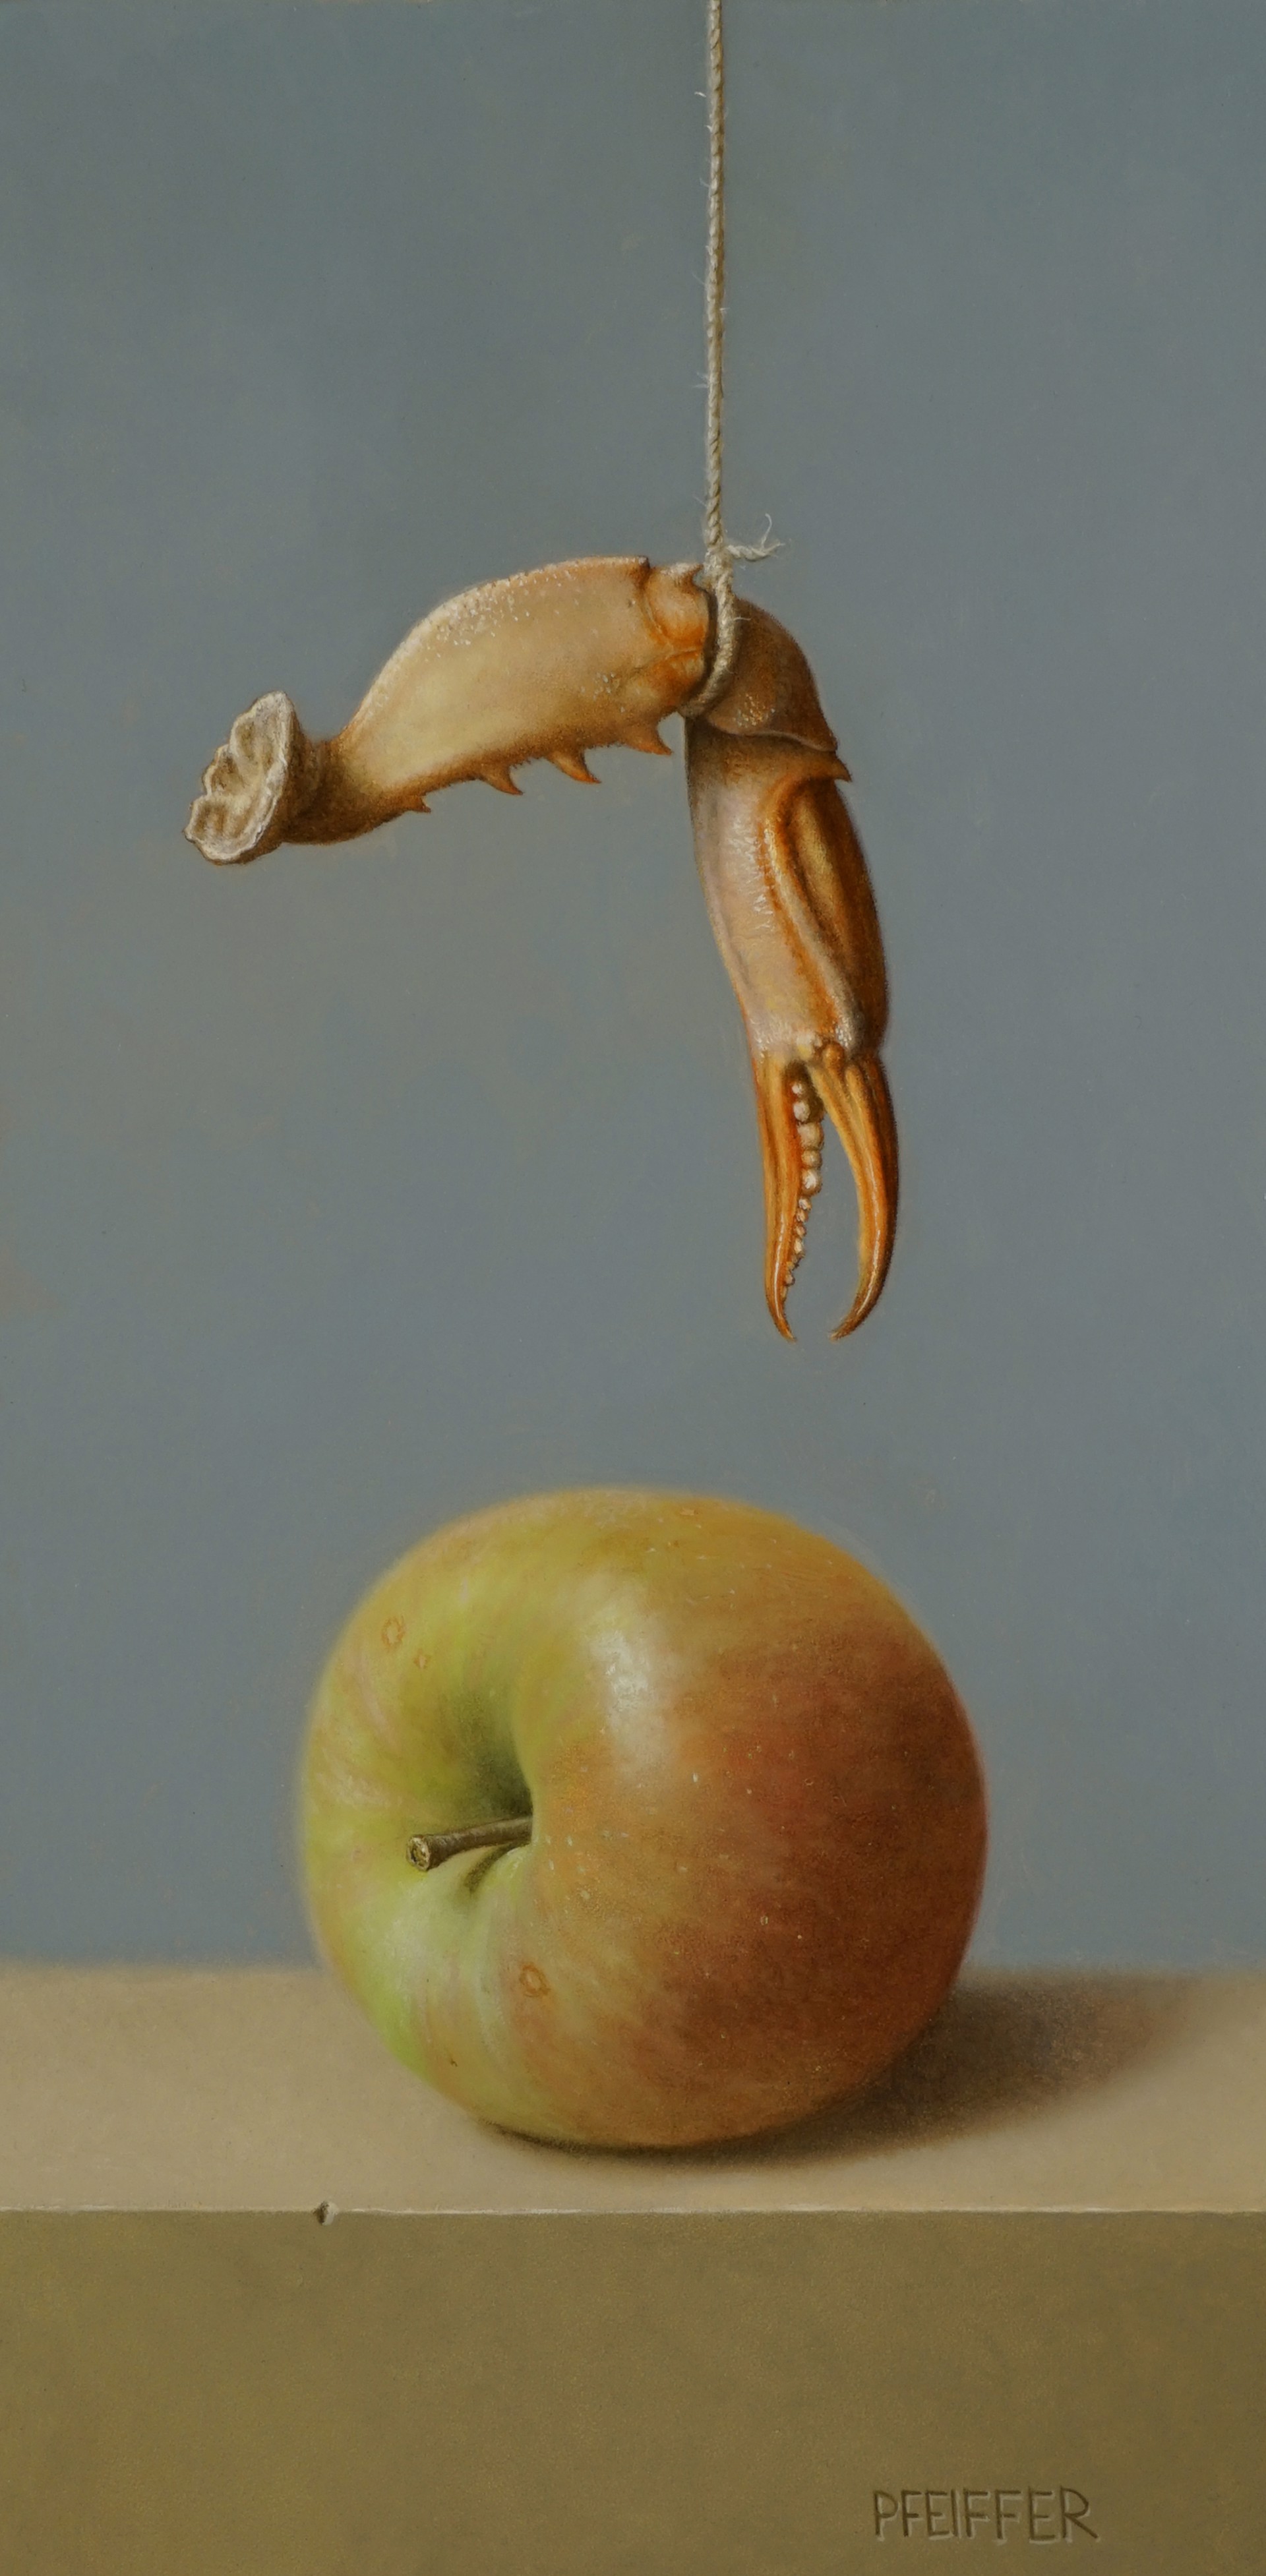 Crab Apple by Jacob A. Pfeiffer